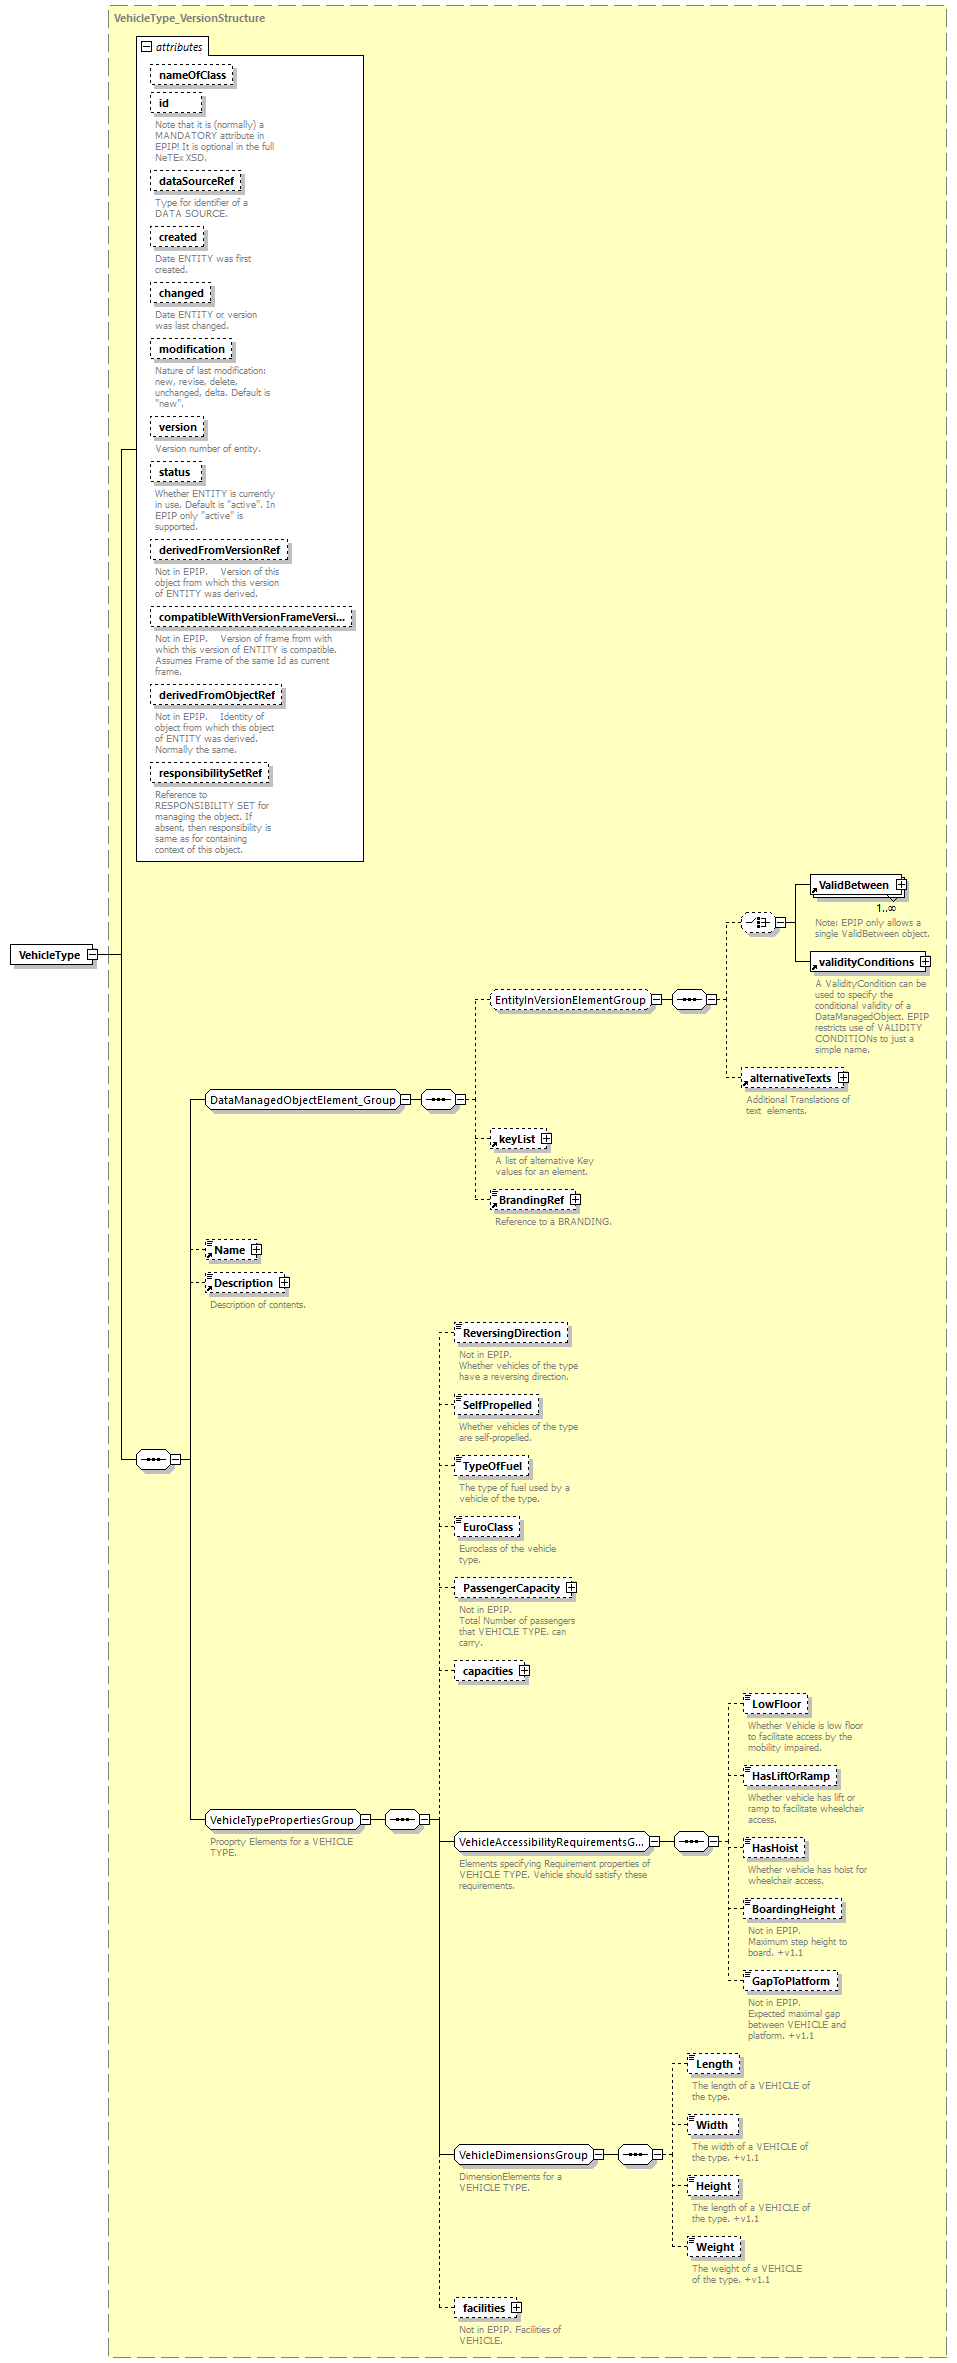 reduced_diagrams/reduced_p538.png